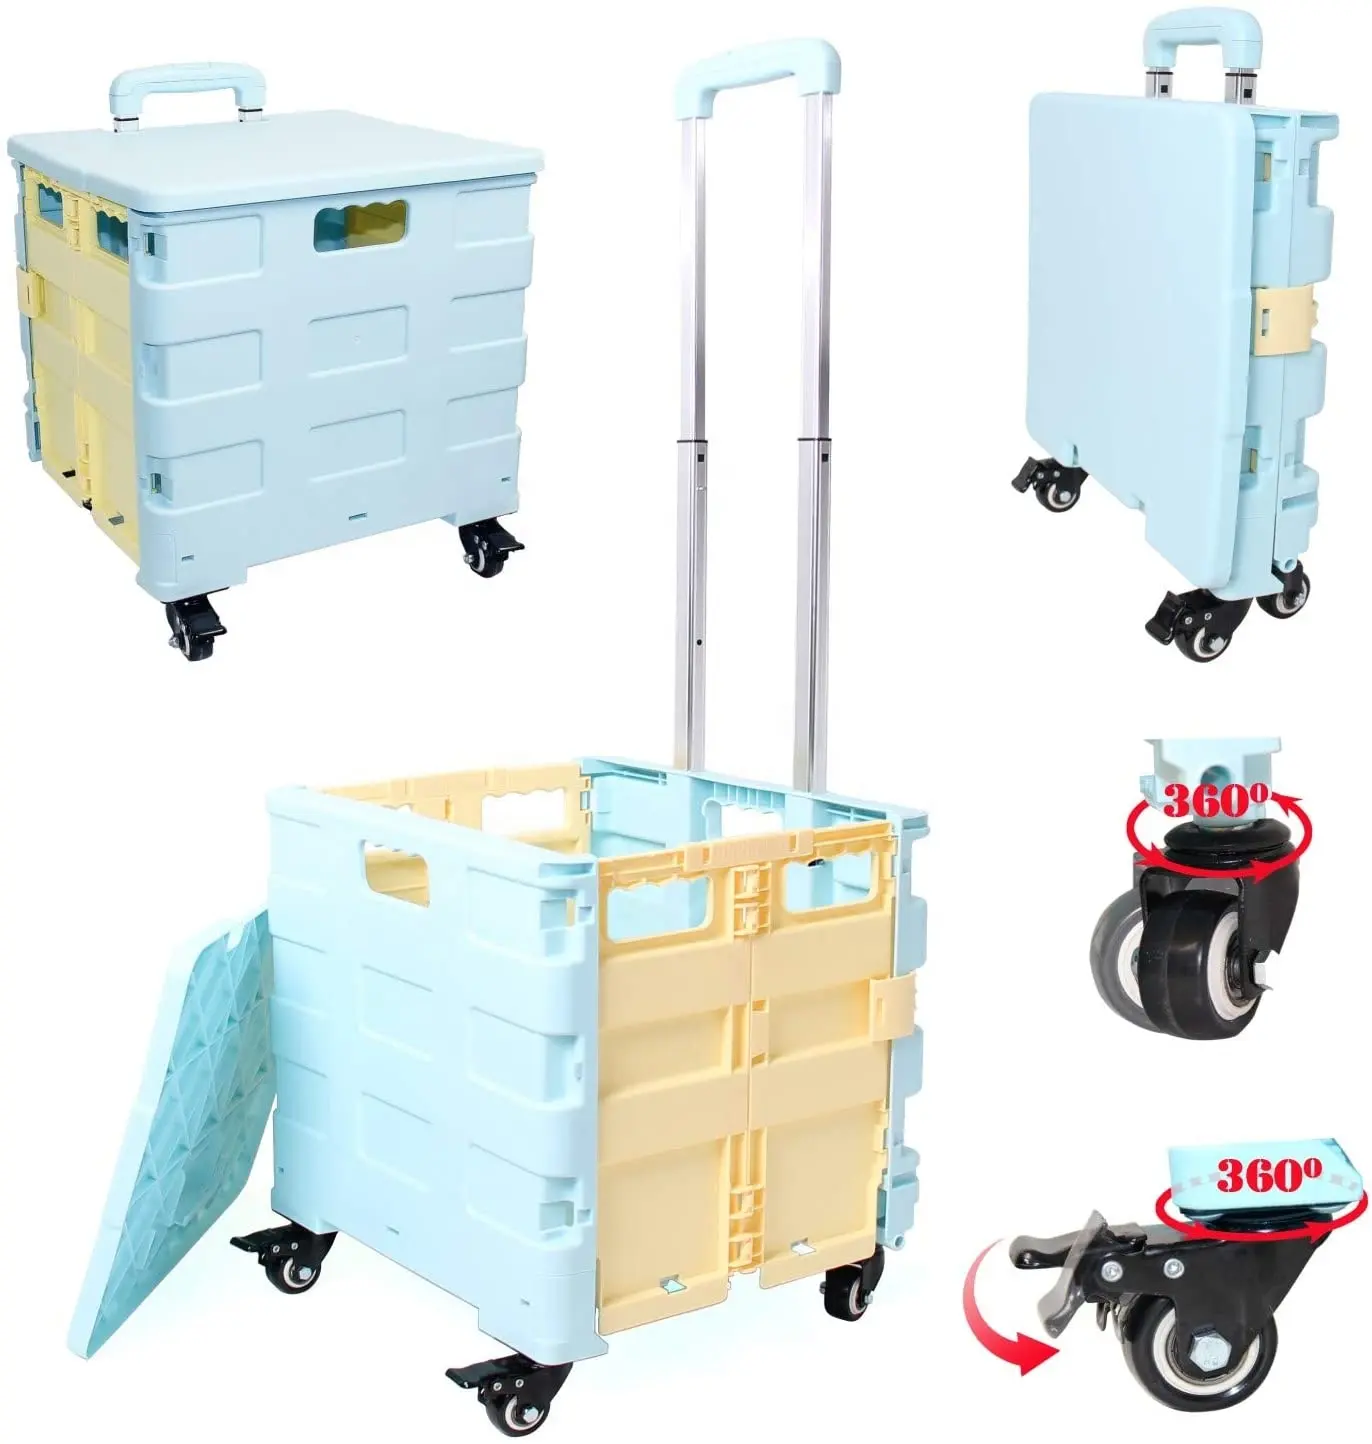 Heavy Duty Plastic Foldable Utility Shopping Carts Folding Portable Rolling Crate Cart for Travel Moving Luggage